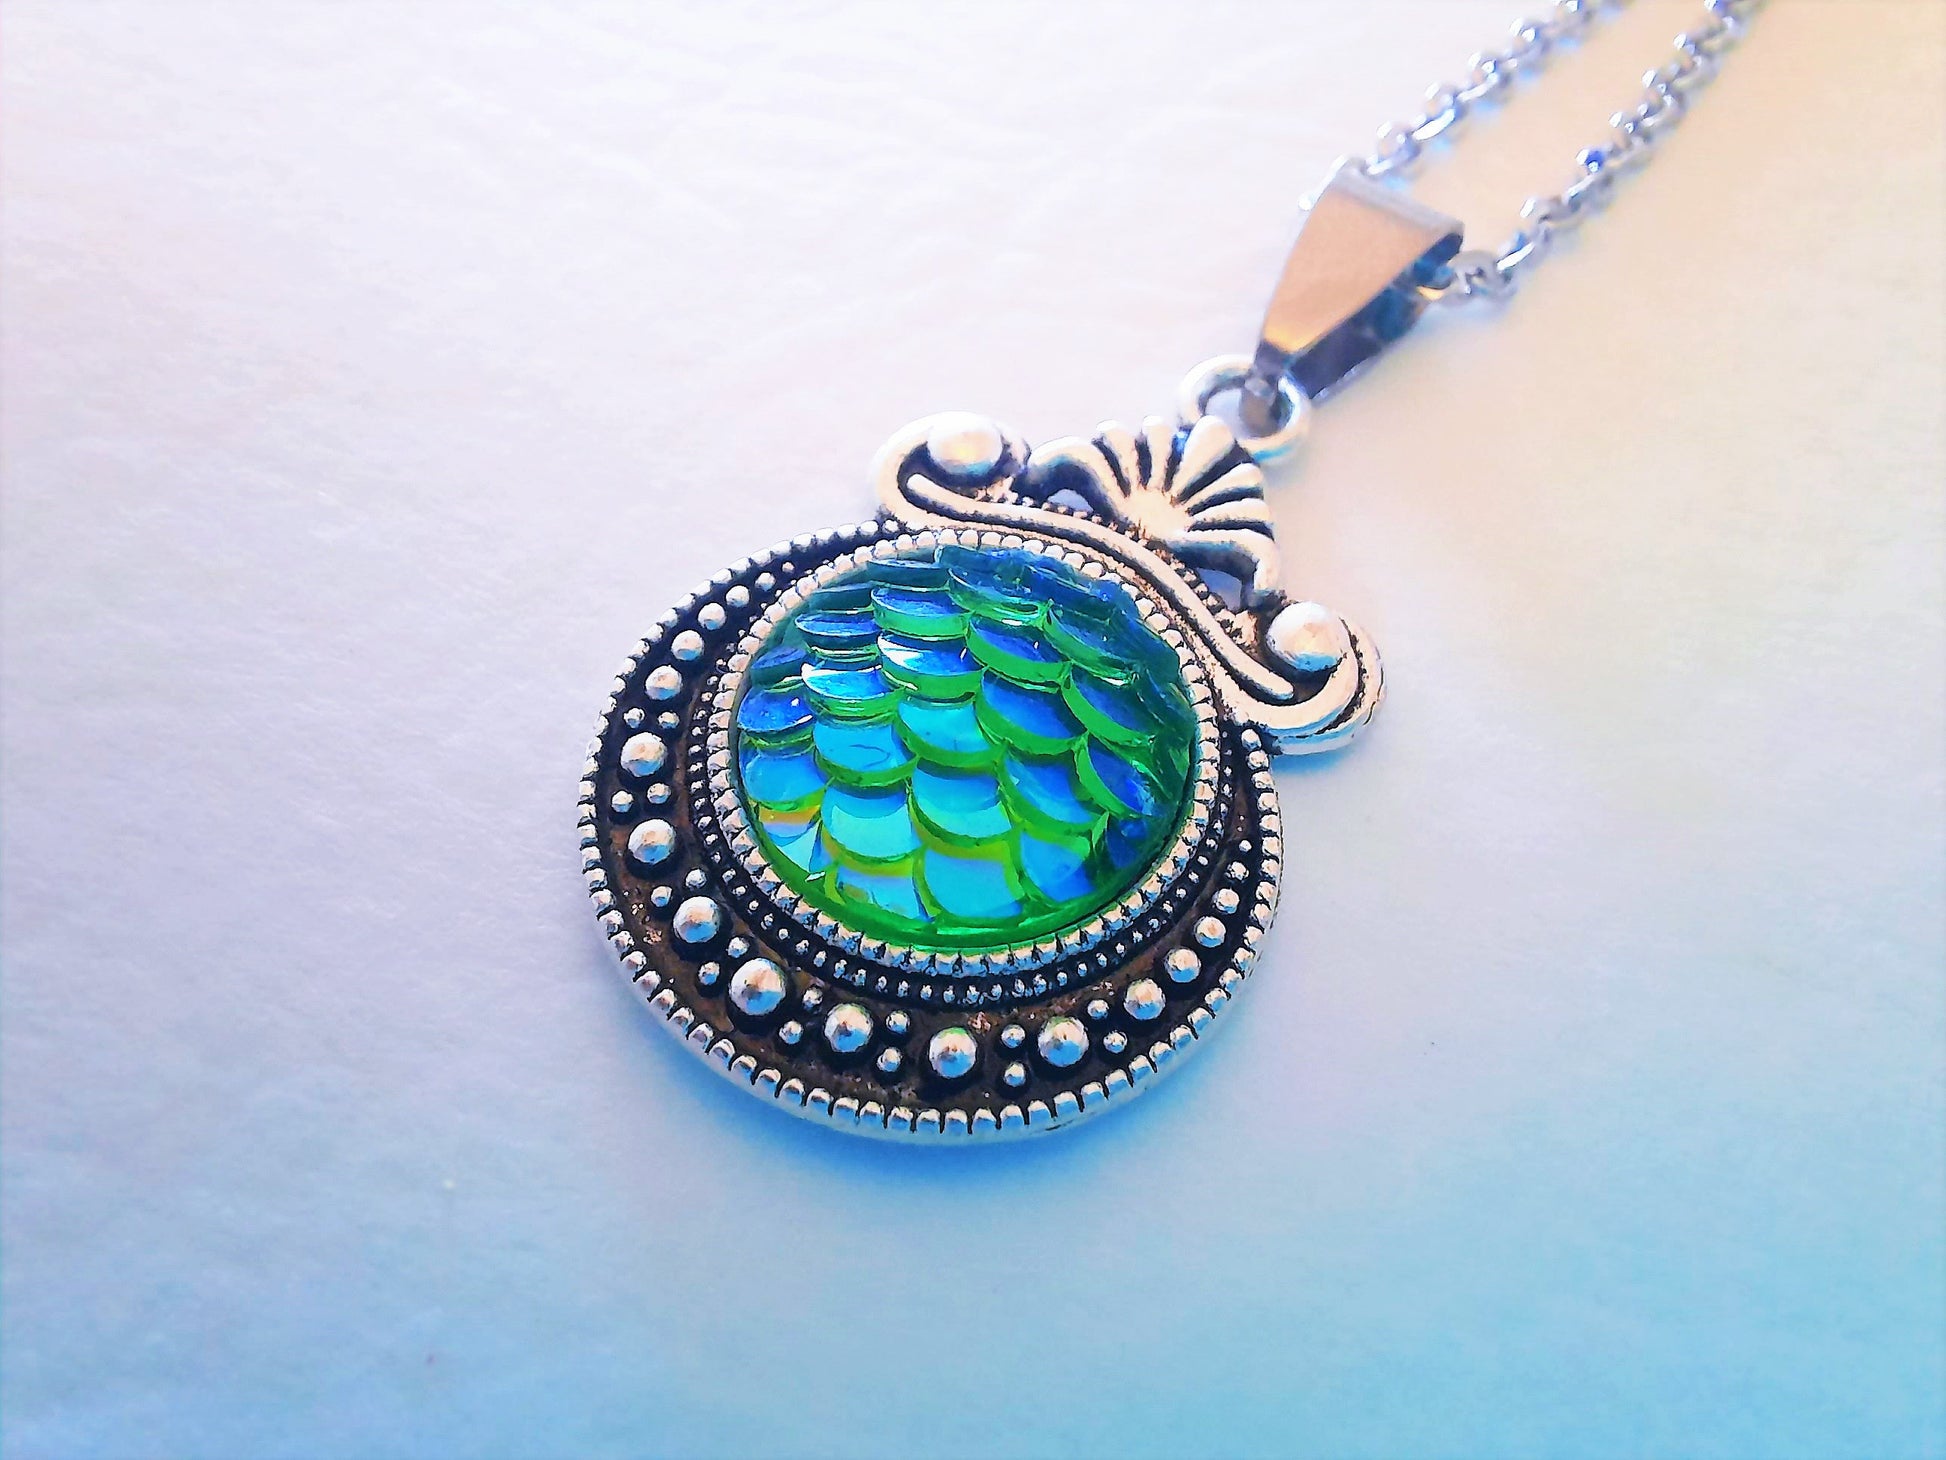 Iridescent Green Mermaid Scale / Dragon Scale / Fish Scale Pendant Necklace / Antique Tibetan Look / Made w/ Hypoallergenic Stainless Steel